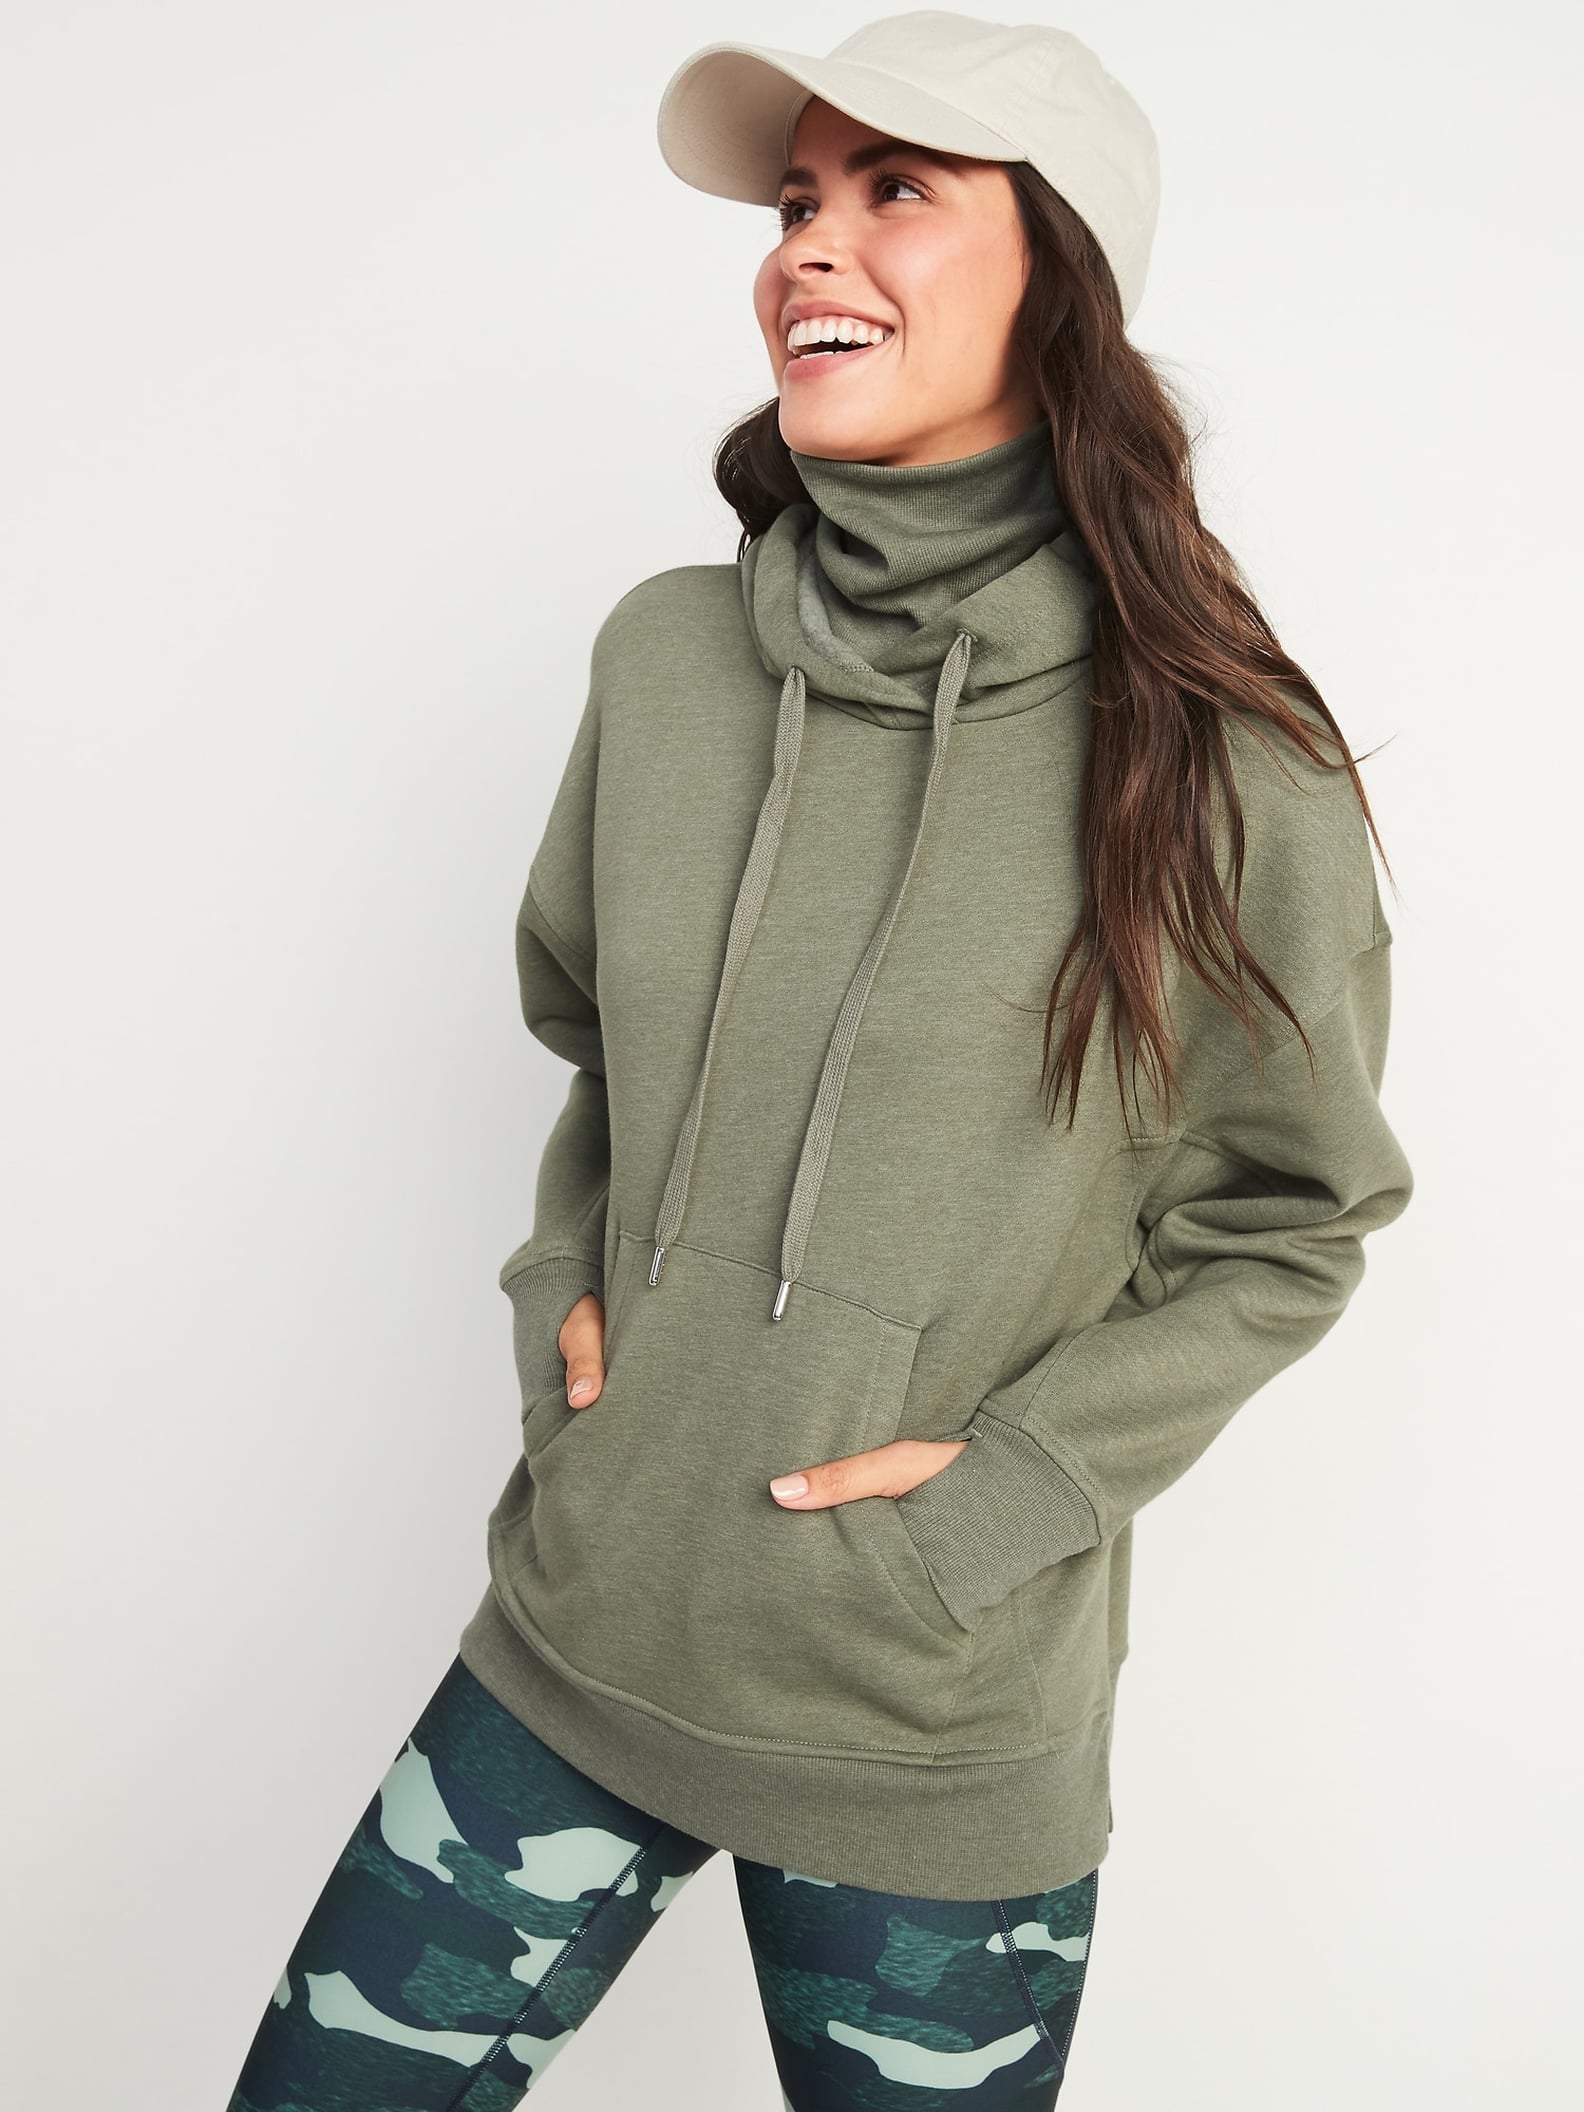 Hoodie With Built-in Mask at Old Navy | POPSUGAR Fashion